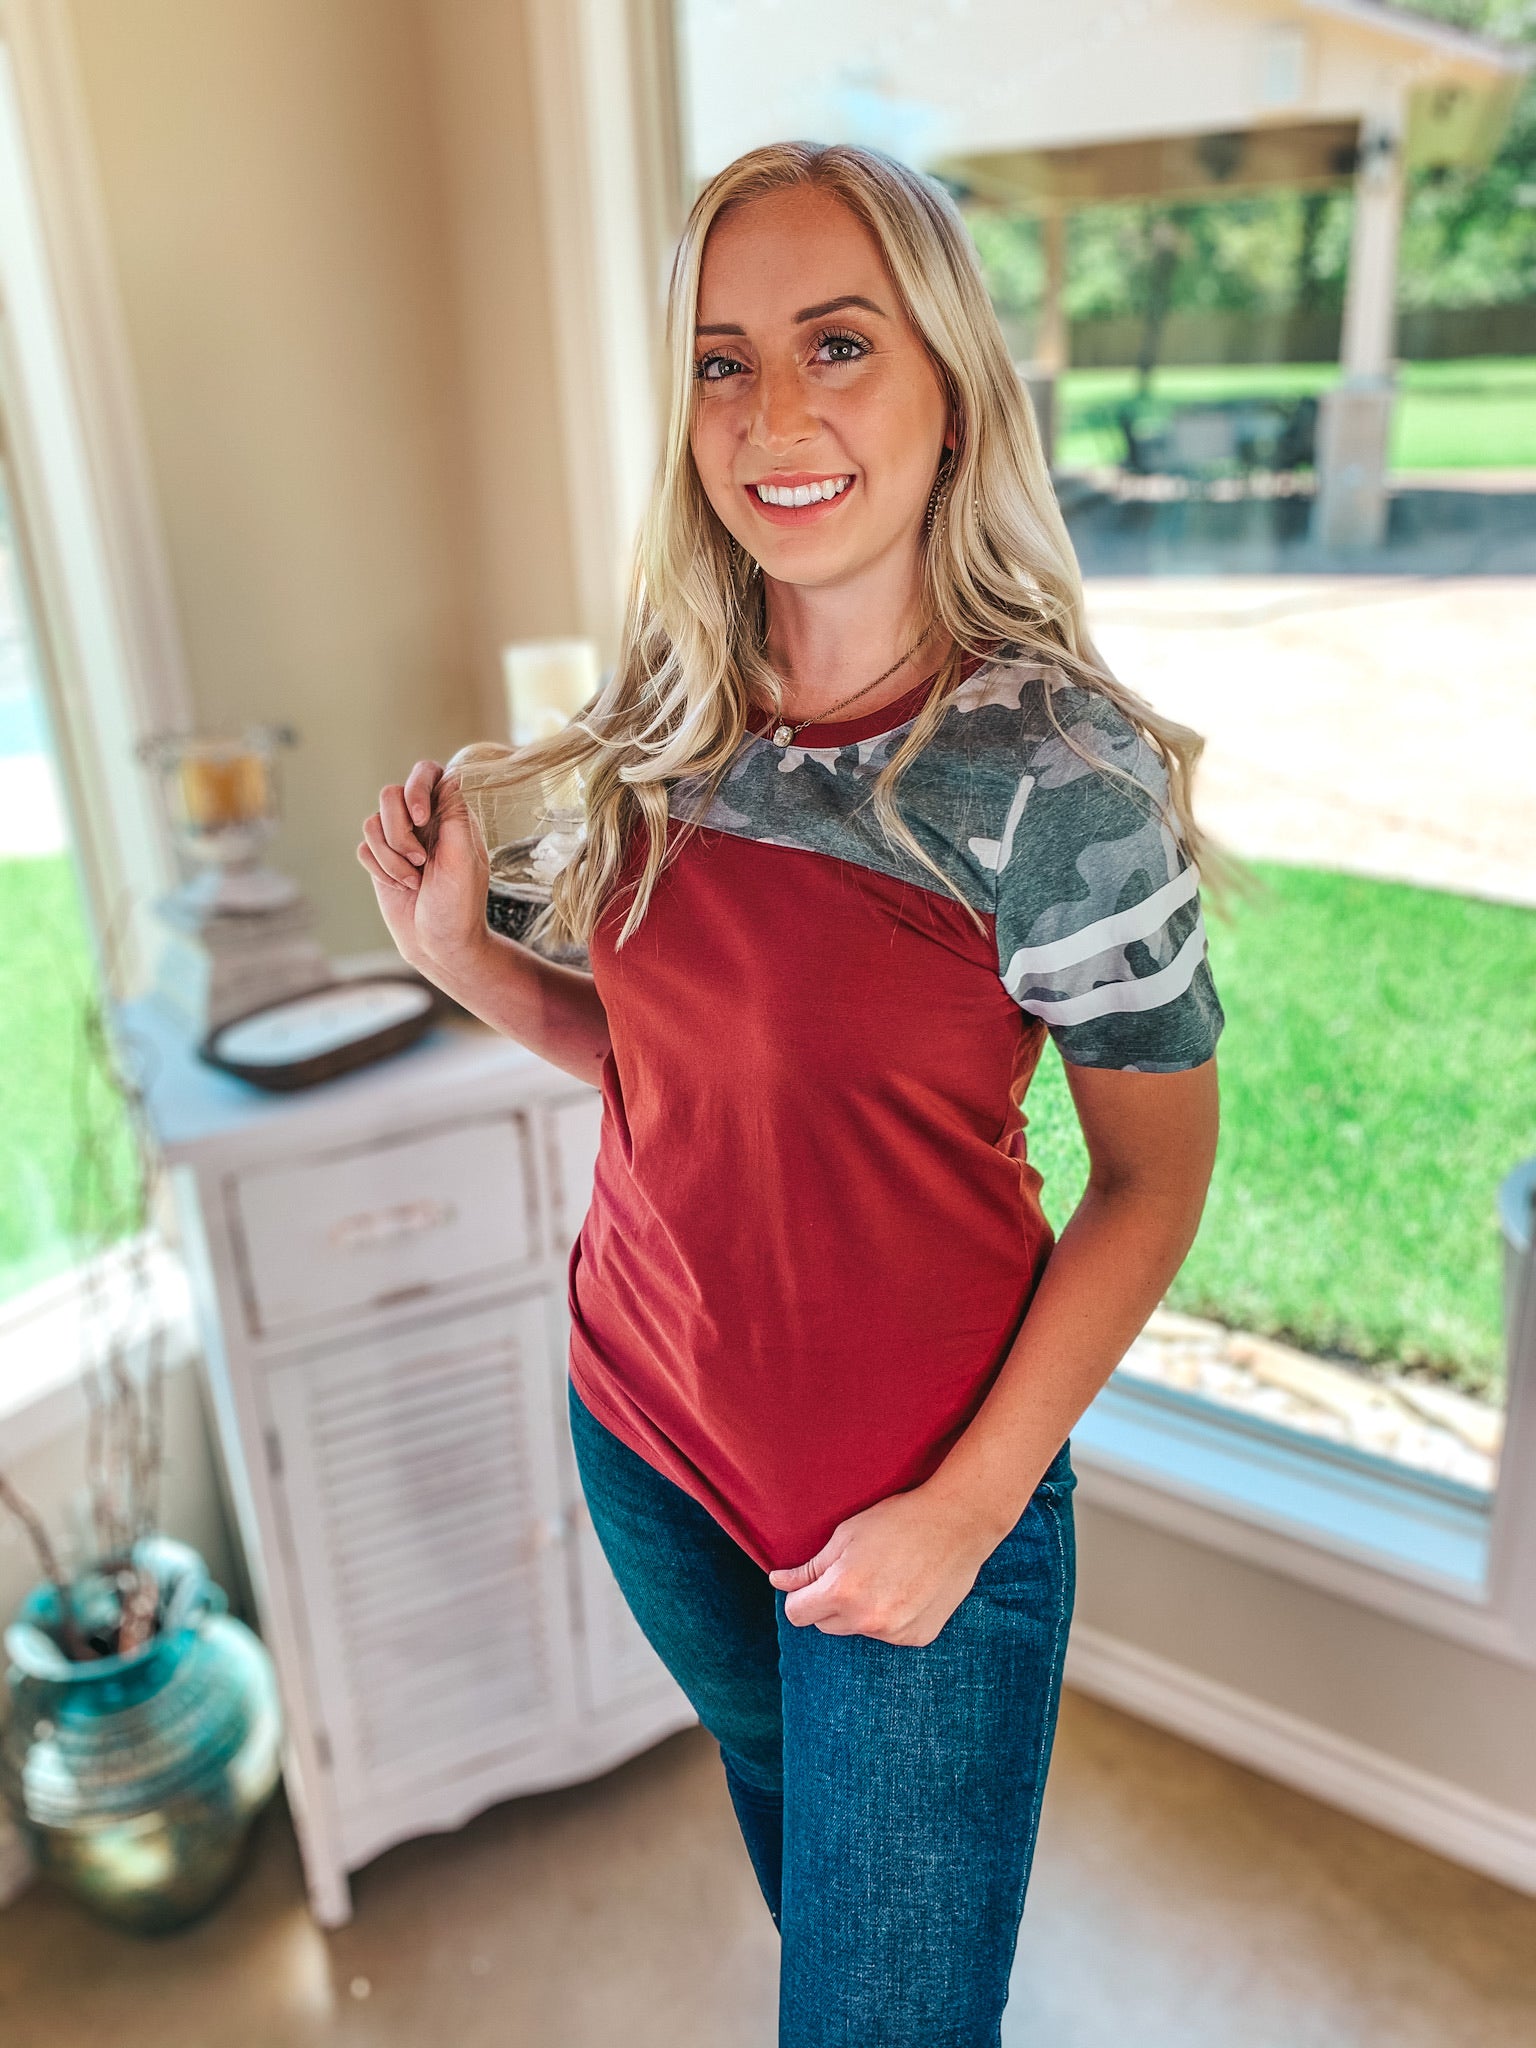 Last Chance Size 2XL & 3XL | Surprise Me Varsity Stripe Sleeve Top with Camouflage Upper in Maroon - Giddy Up Glamour Boutique